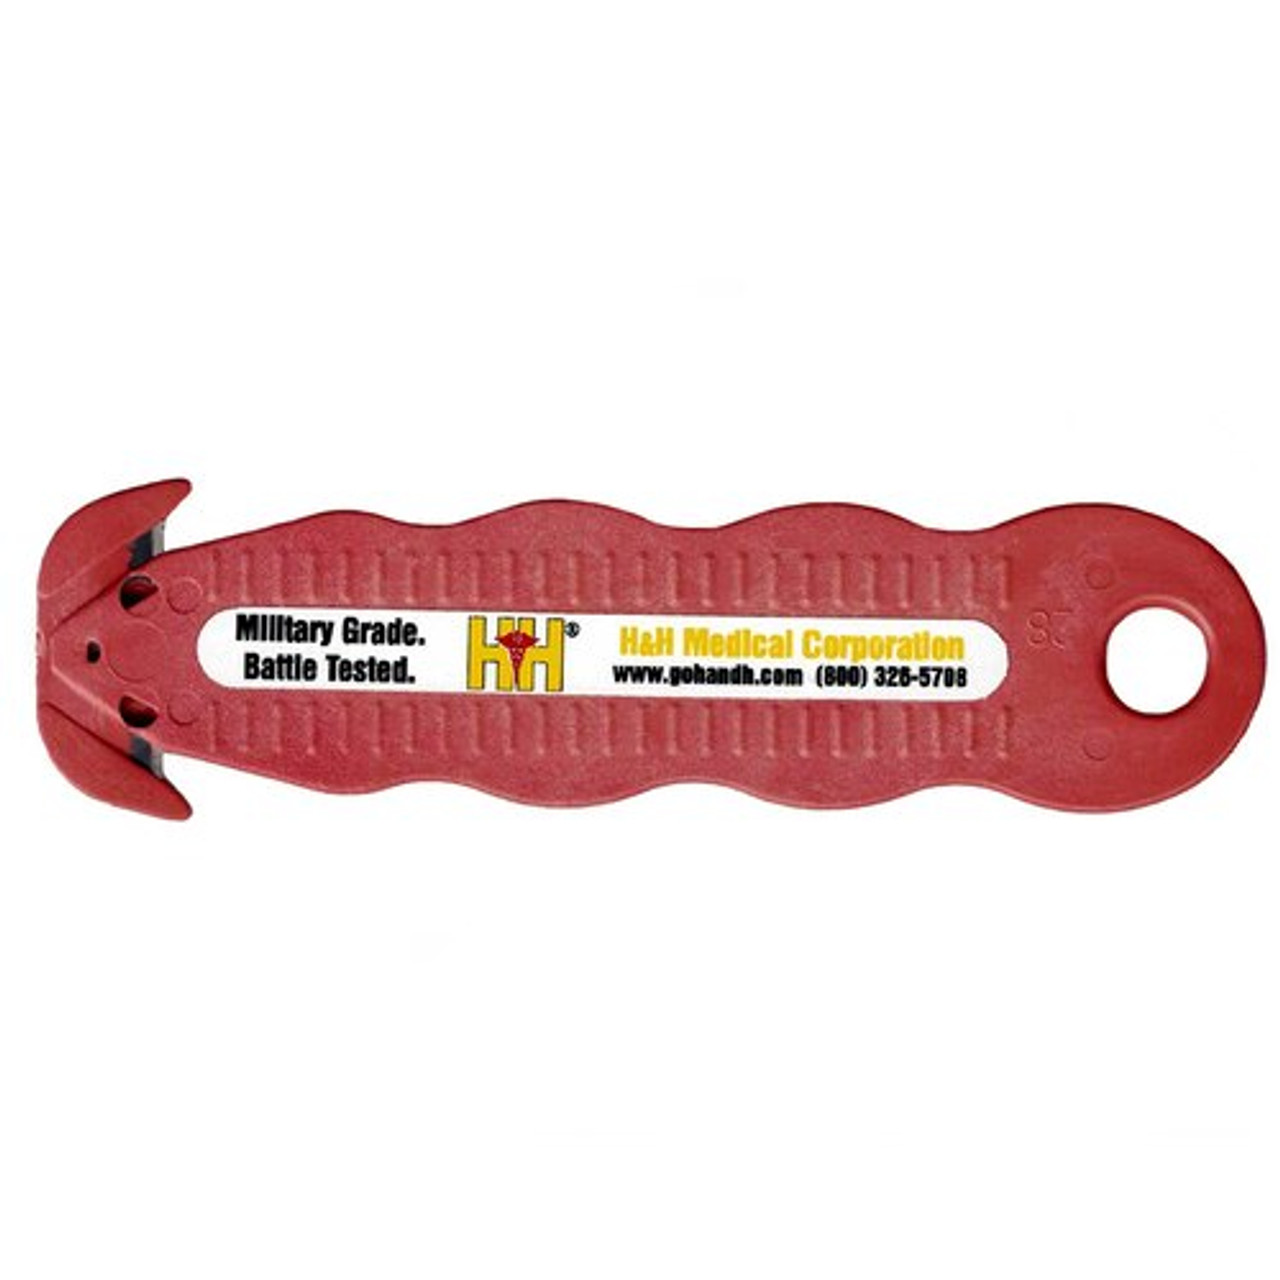 Klever Kutter Safety Cutter from H&H